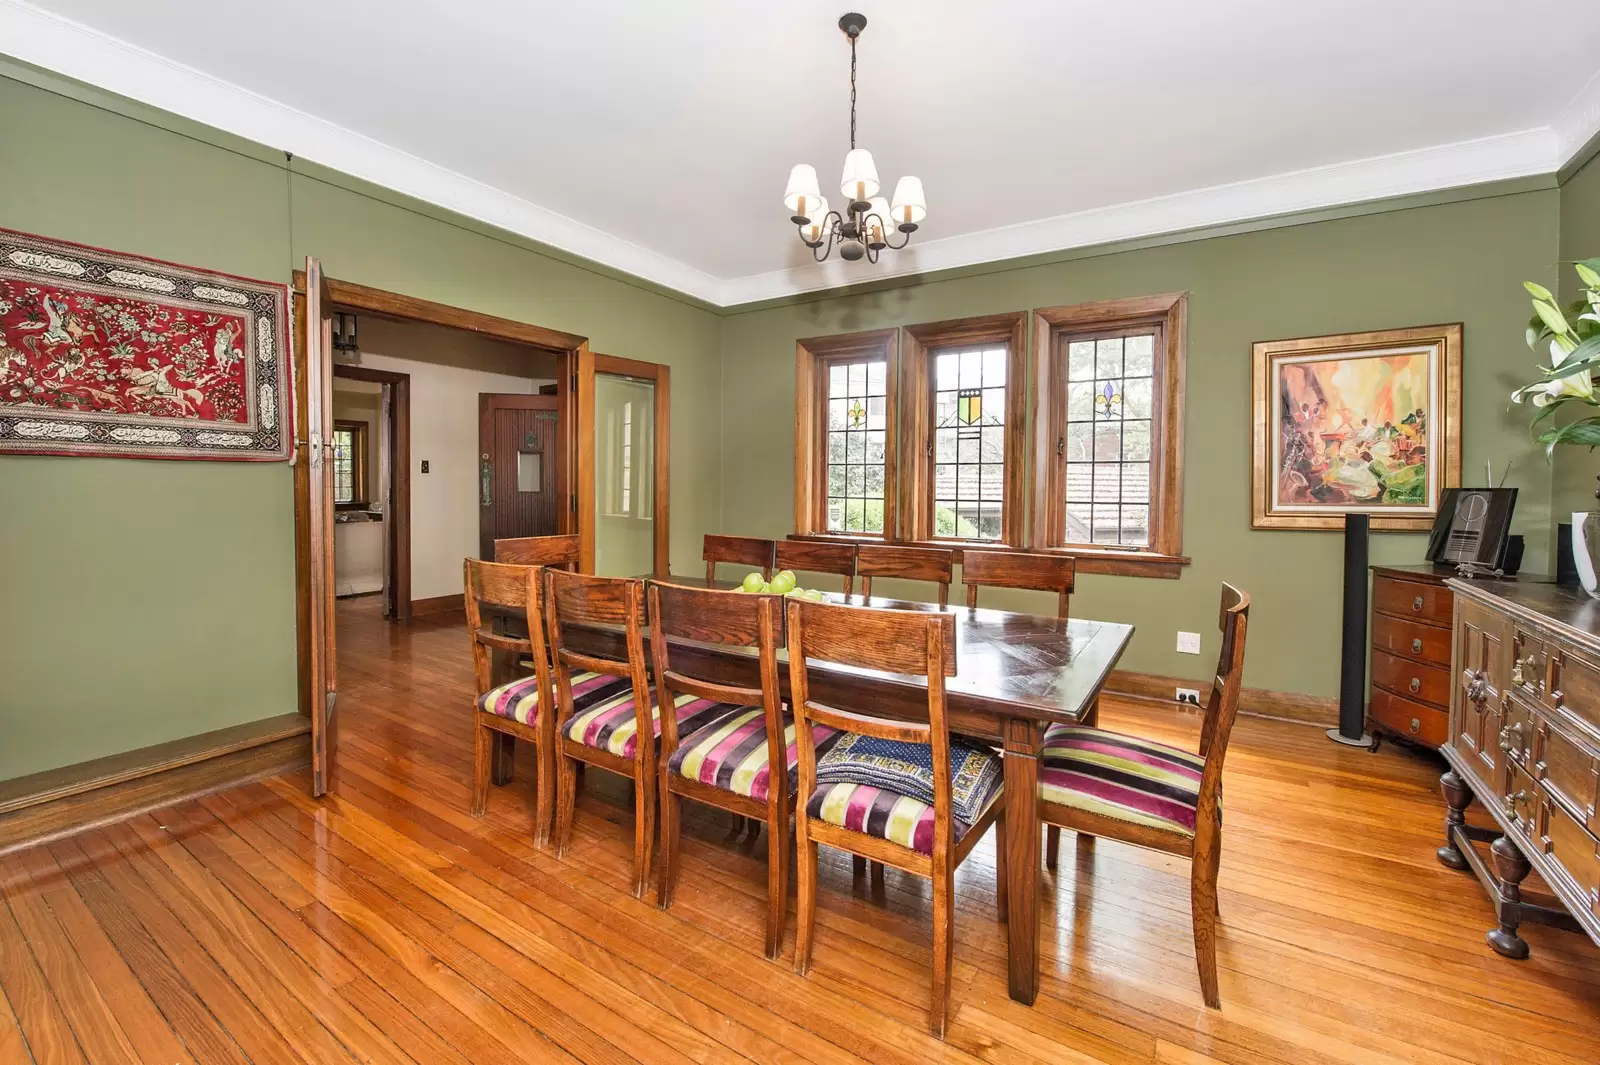 Photo #6: 8 Glencoe Road, Woollahra - Sold by Sydney Sotheby's International Realty